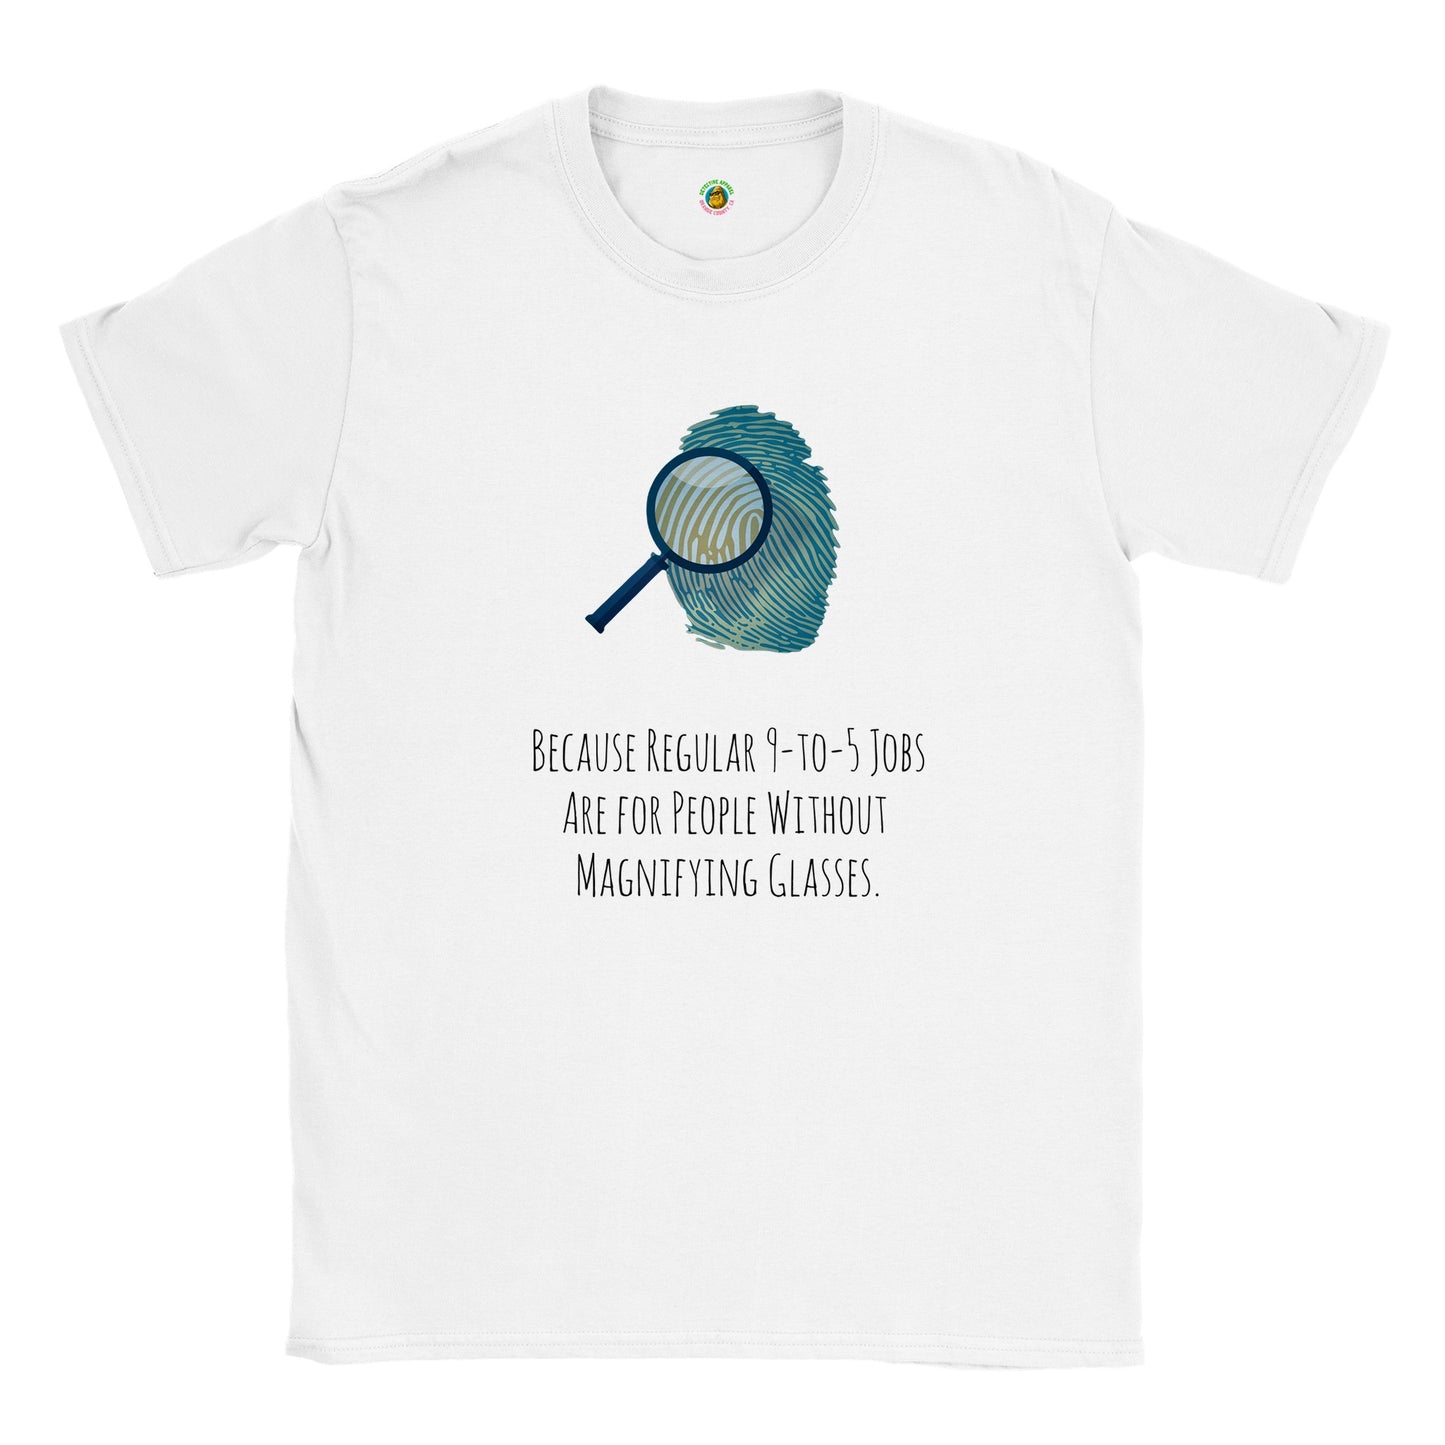 Short-Sleeve Unisex Crewneck T-shirt - Because Regular 9-to-5 Jobs Are for People Without Magnifying Glasses.